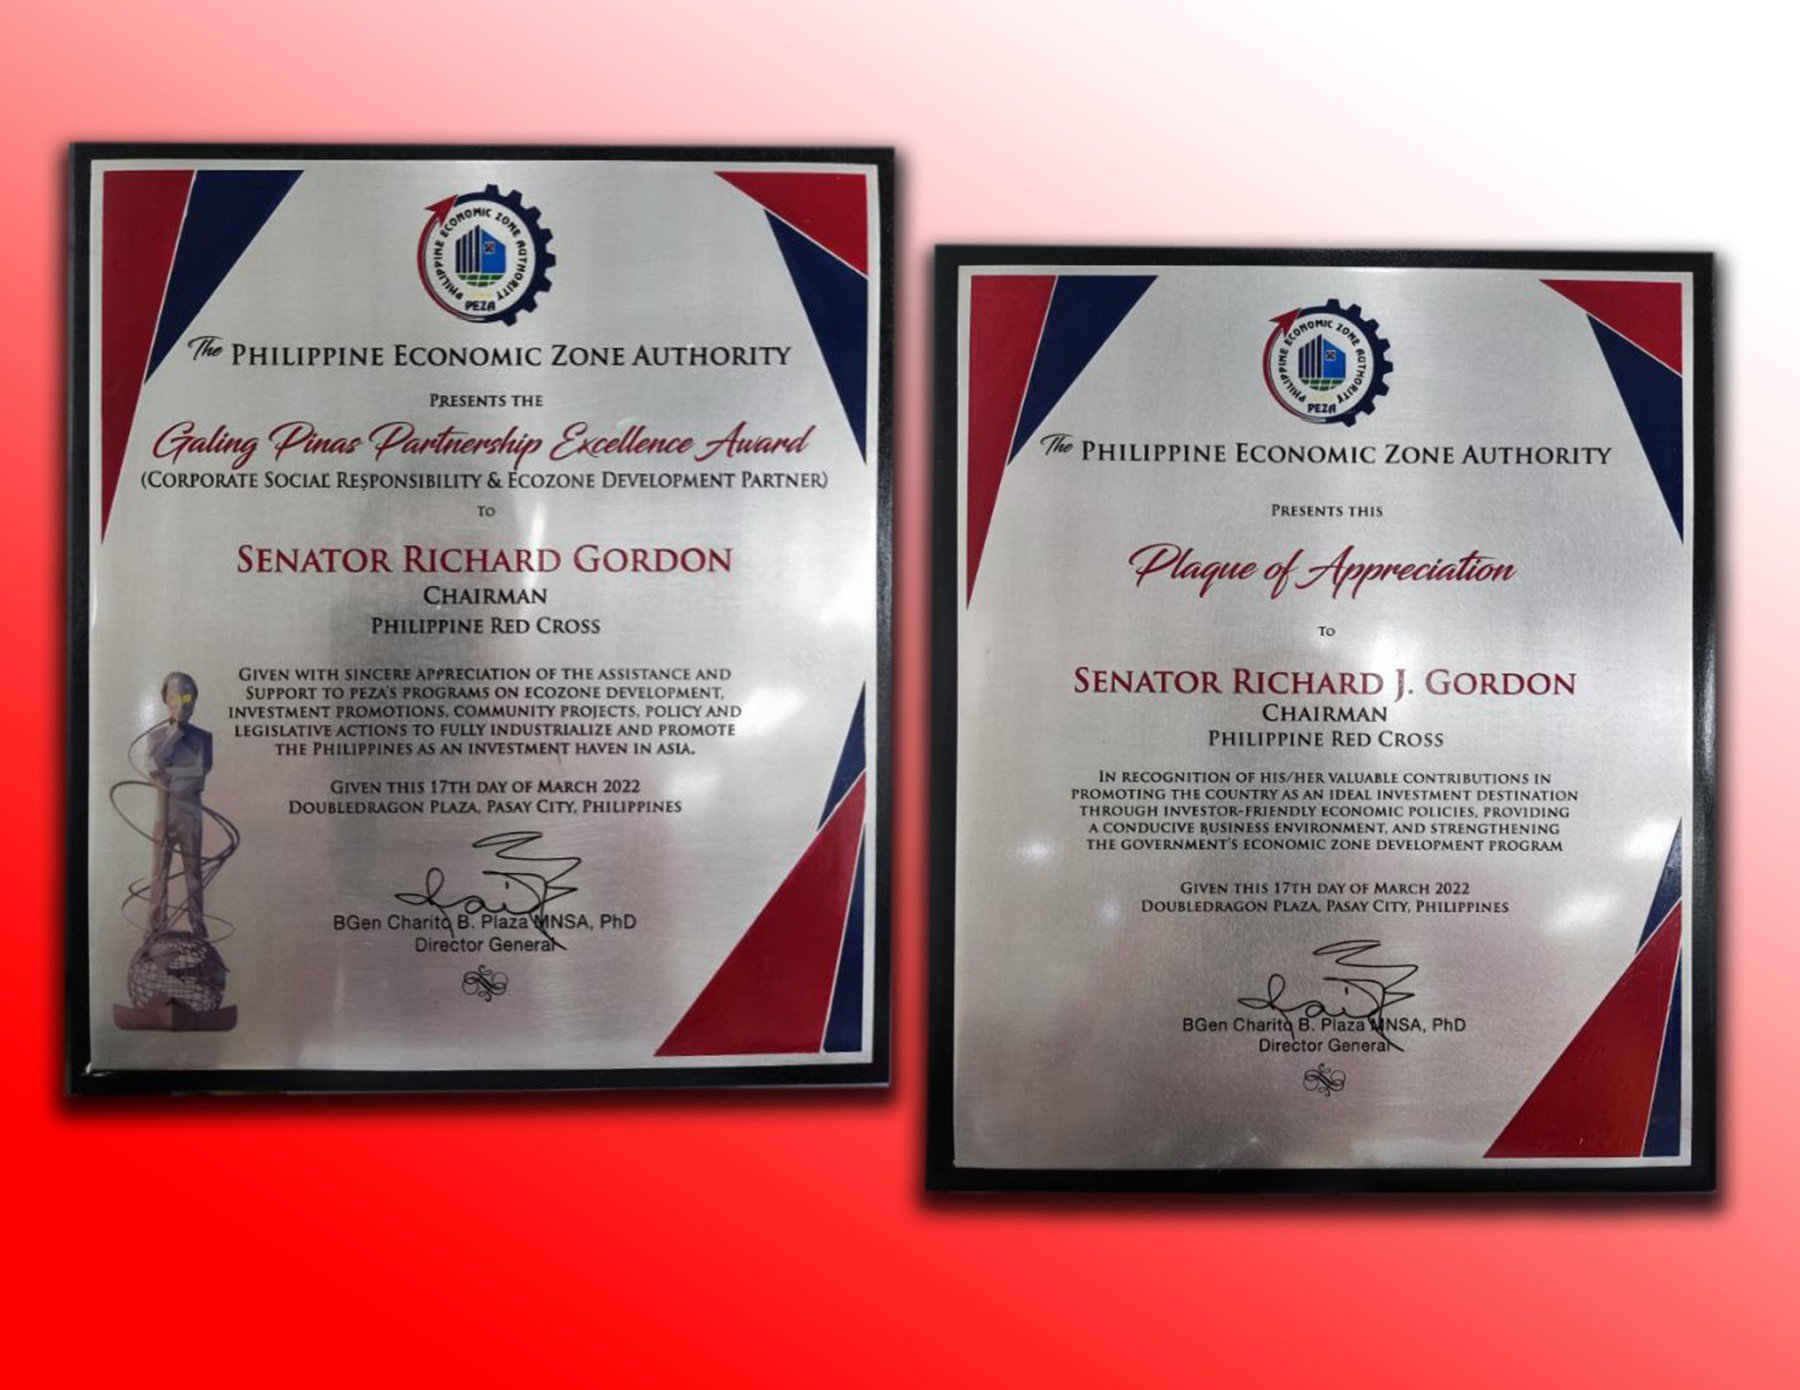 PEZA gives Red Cross Chairman Excellence Award